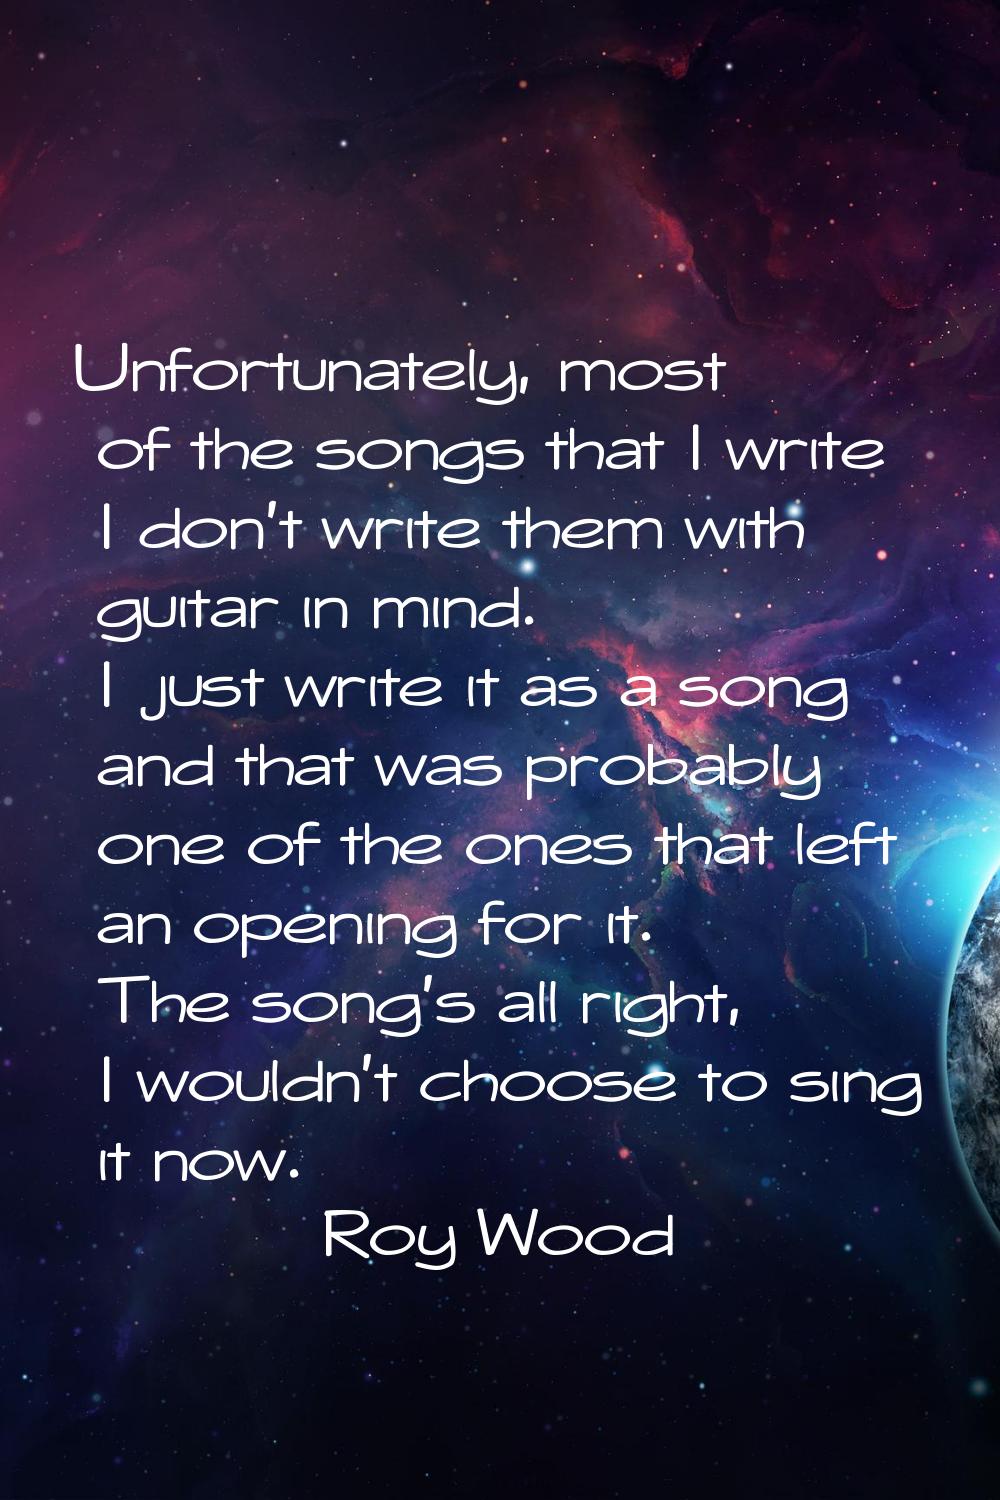 Unfortunately, most of the songs that I write I don't write them with guitar in mind. I just write 